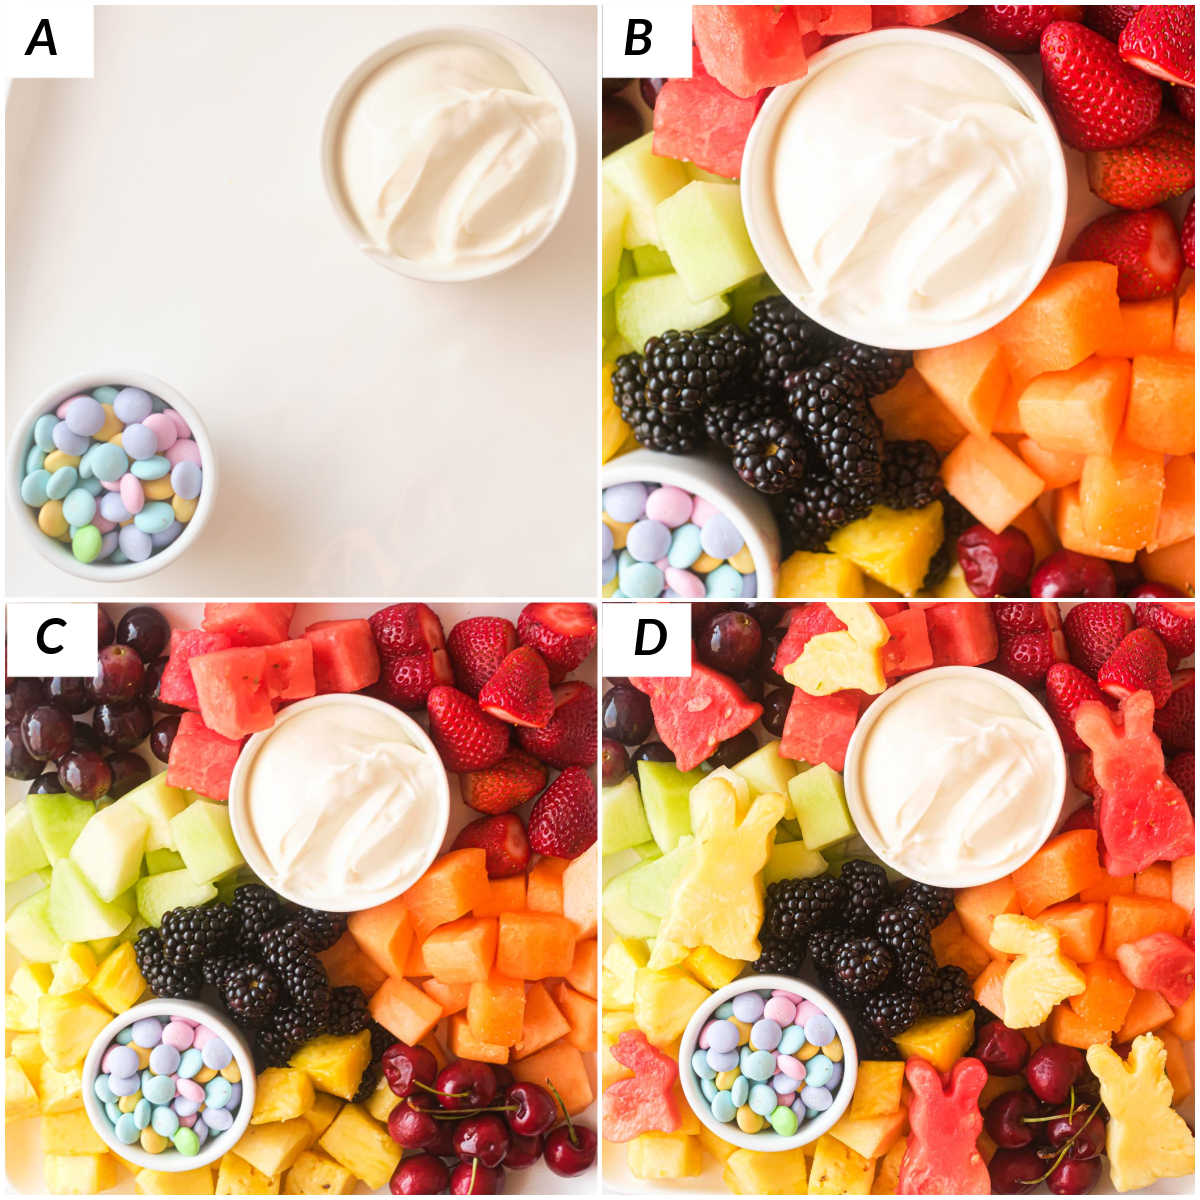 image collage showing the steps for making an easter fruit tray